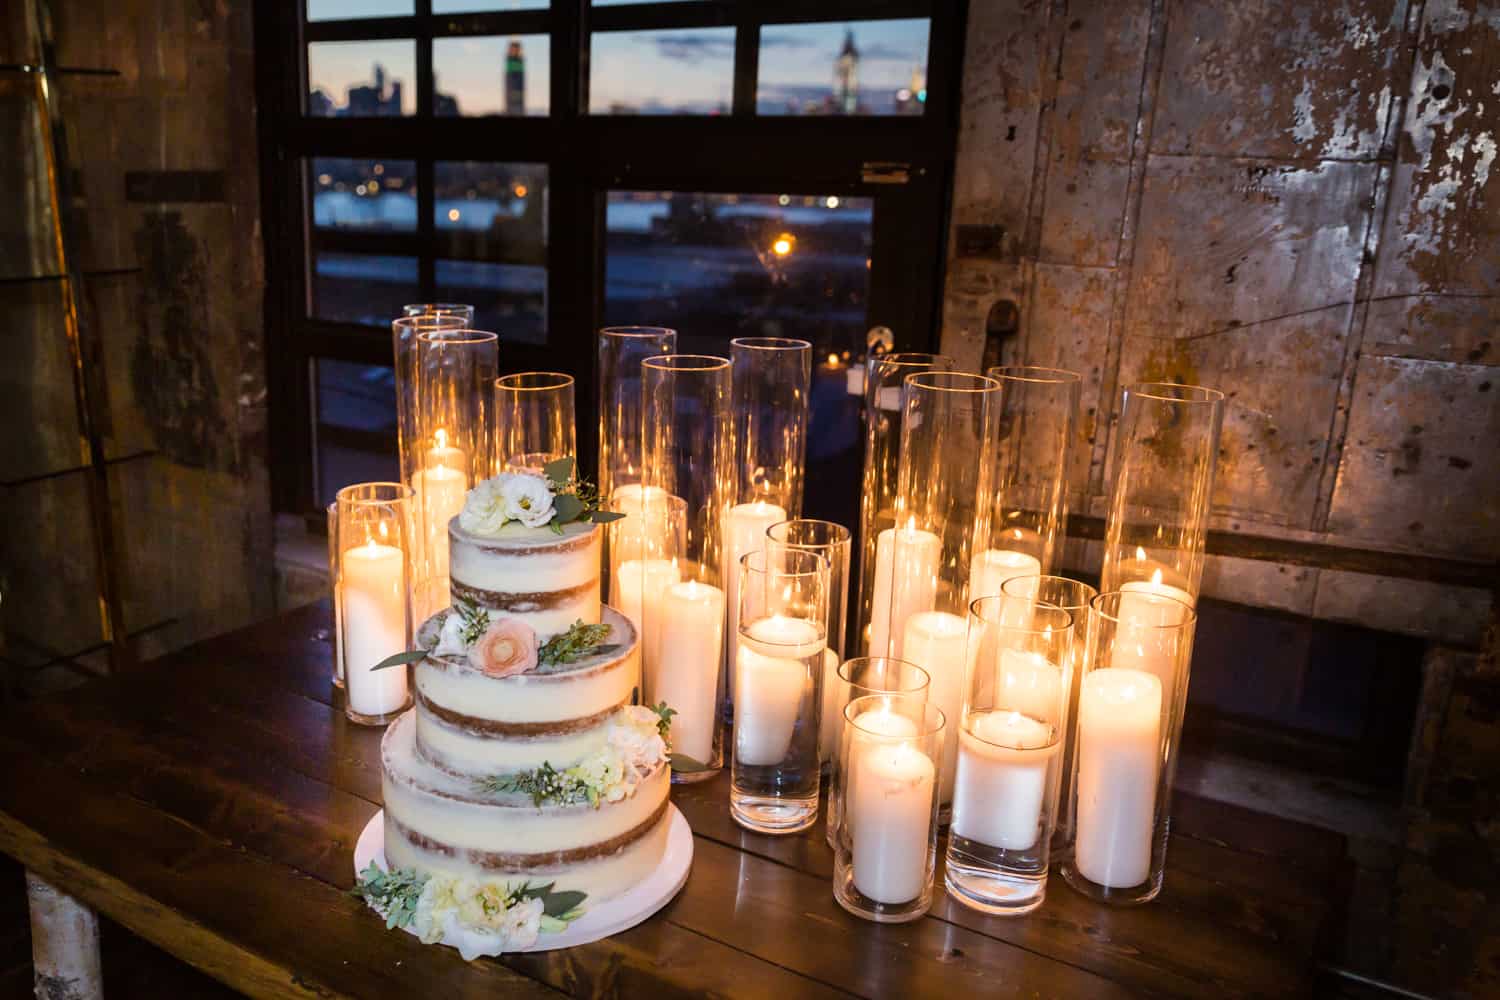 Wedding cake and rows of candles on table with view of NYC skyline through window